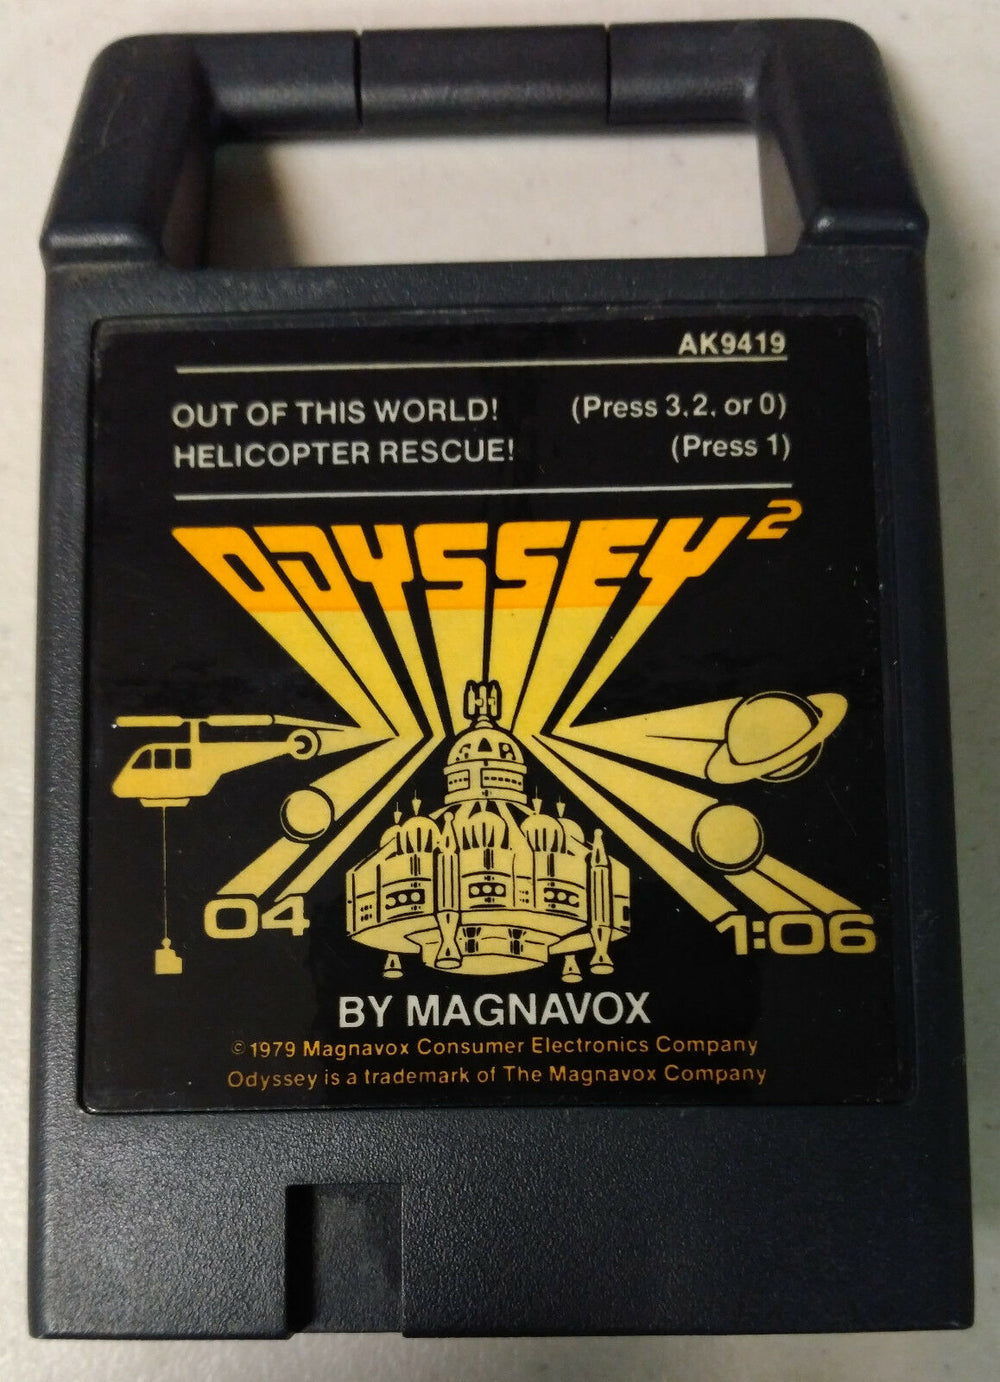 Magnavox Odyssey 2 - Out of this World/Helicopter Rescue